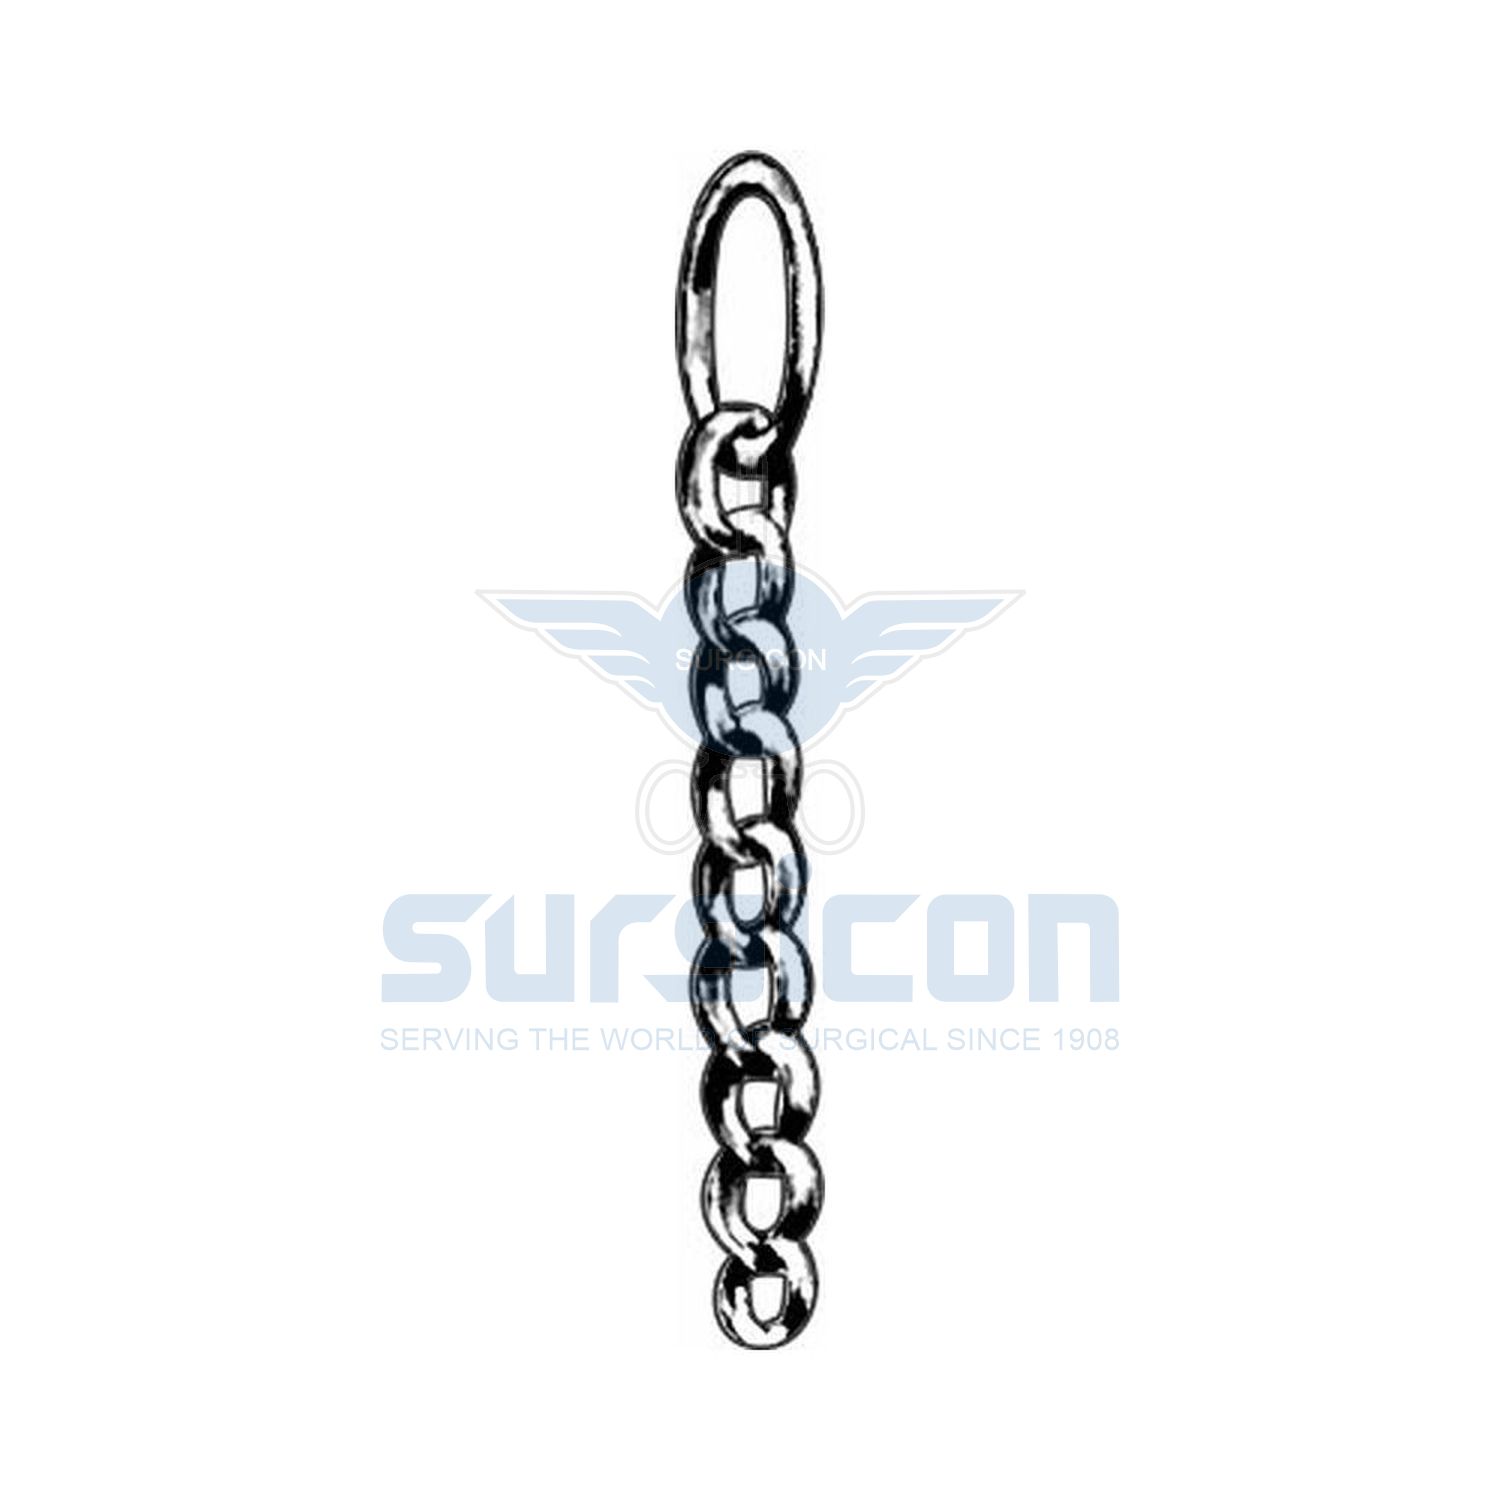 Retractor-Chain-Only-J-34-1150